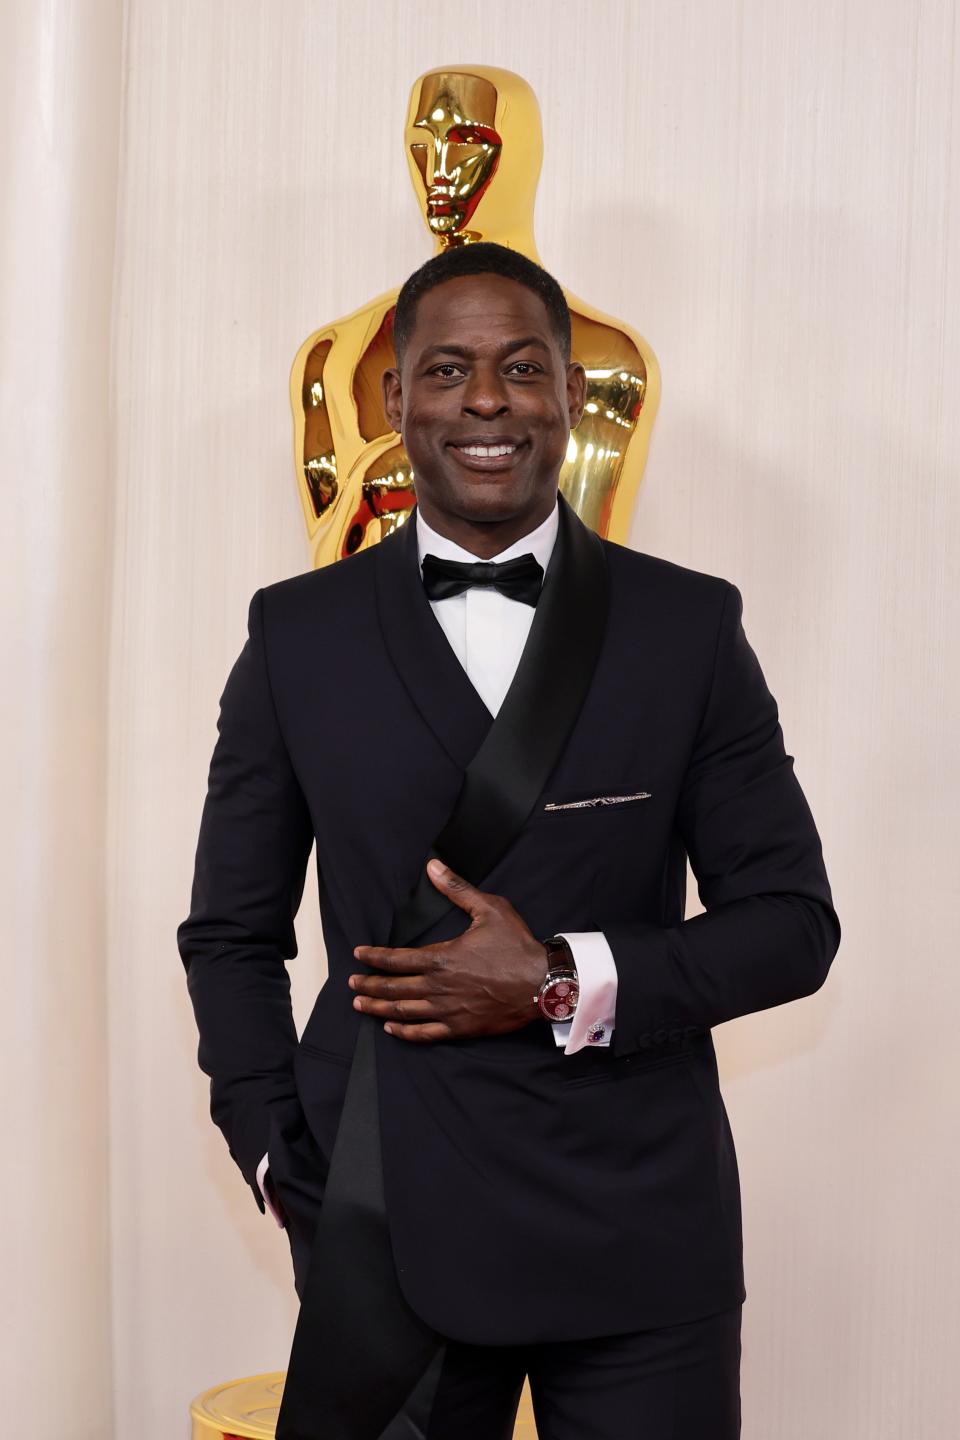 HOLLYWOOD, CALIFORNIA - MARCH 10: Sterling K. Brown attends the 96th Annual Academy Awards on March 10, 2024 in Hollywood, California. (Photo by Aliah Anderson/Getty Images)